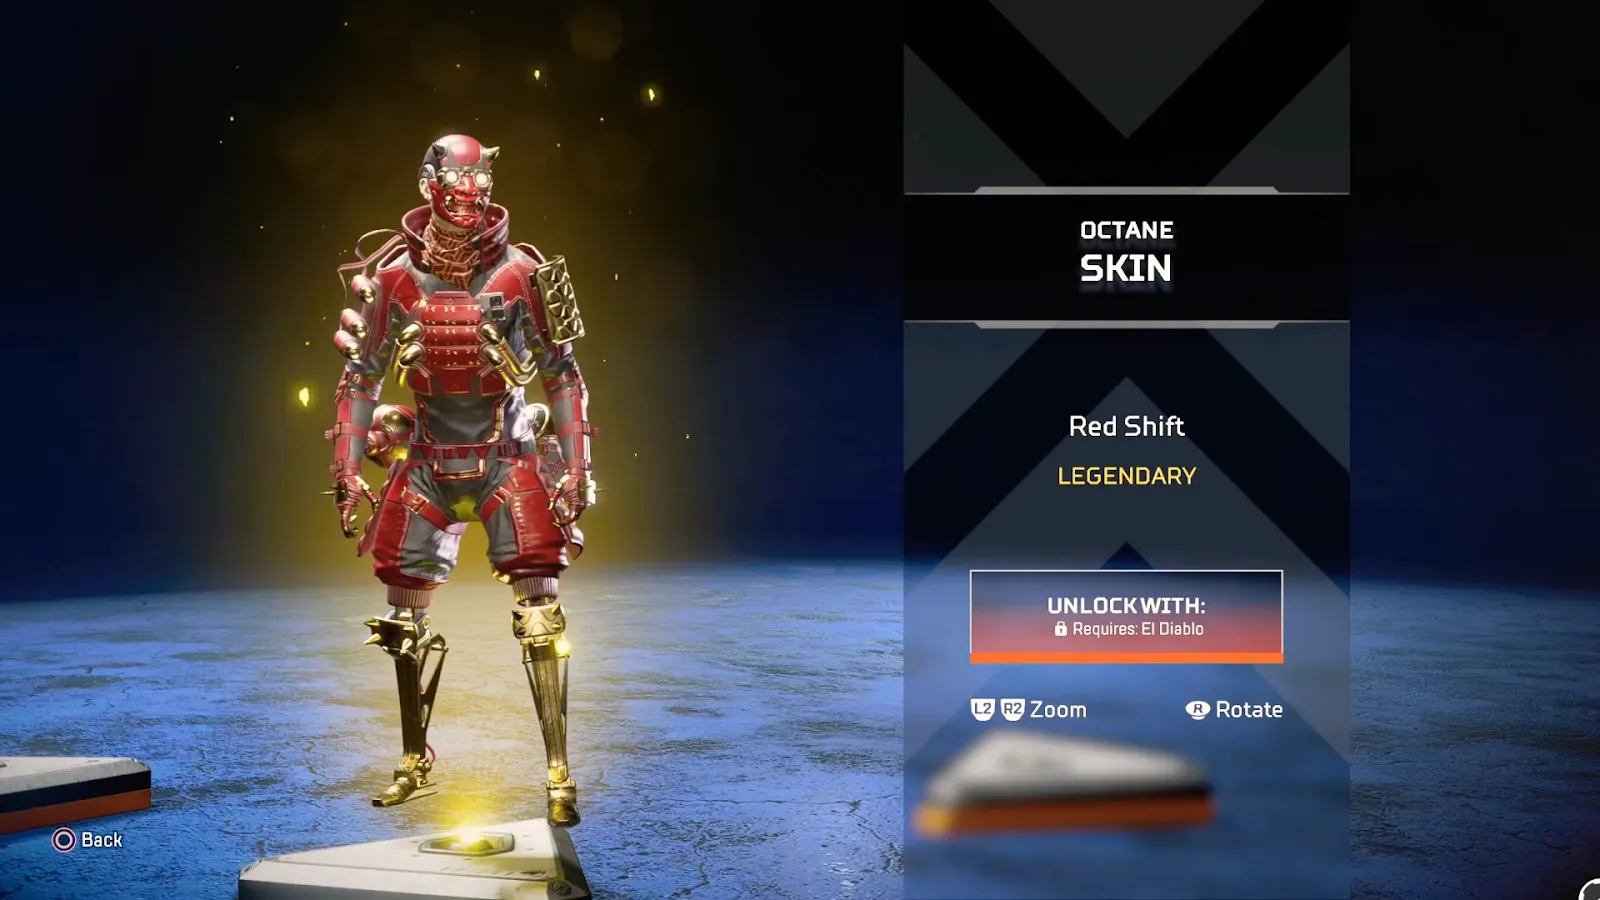 The Red Shift skin in Apex Legends